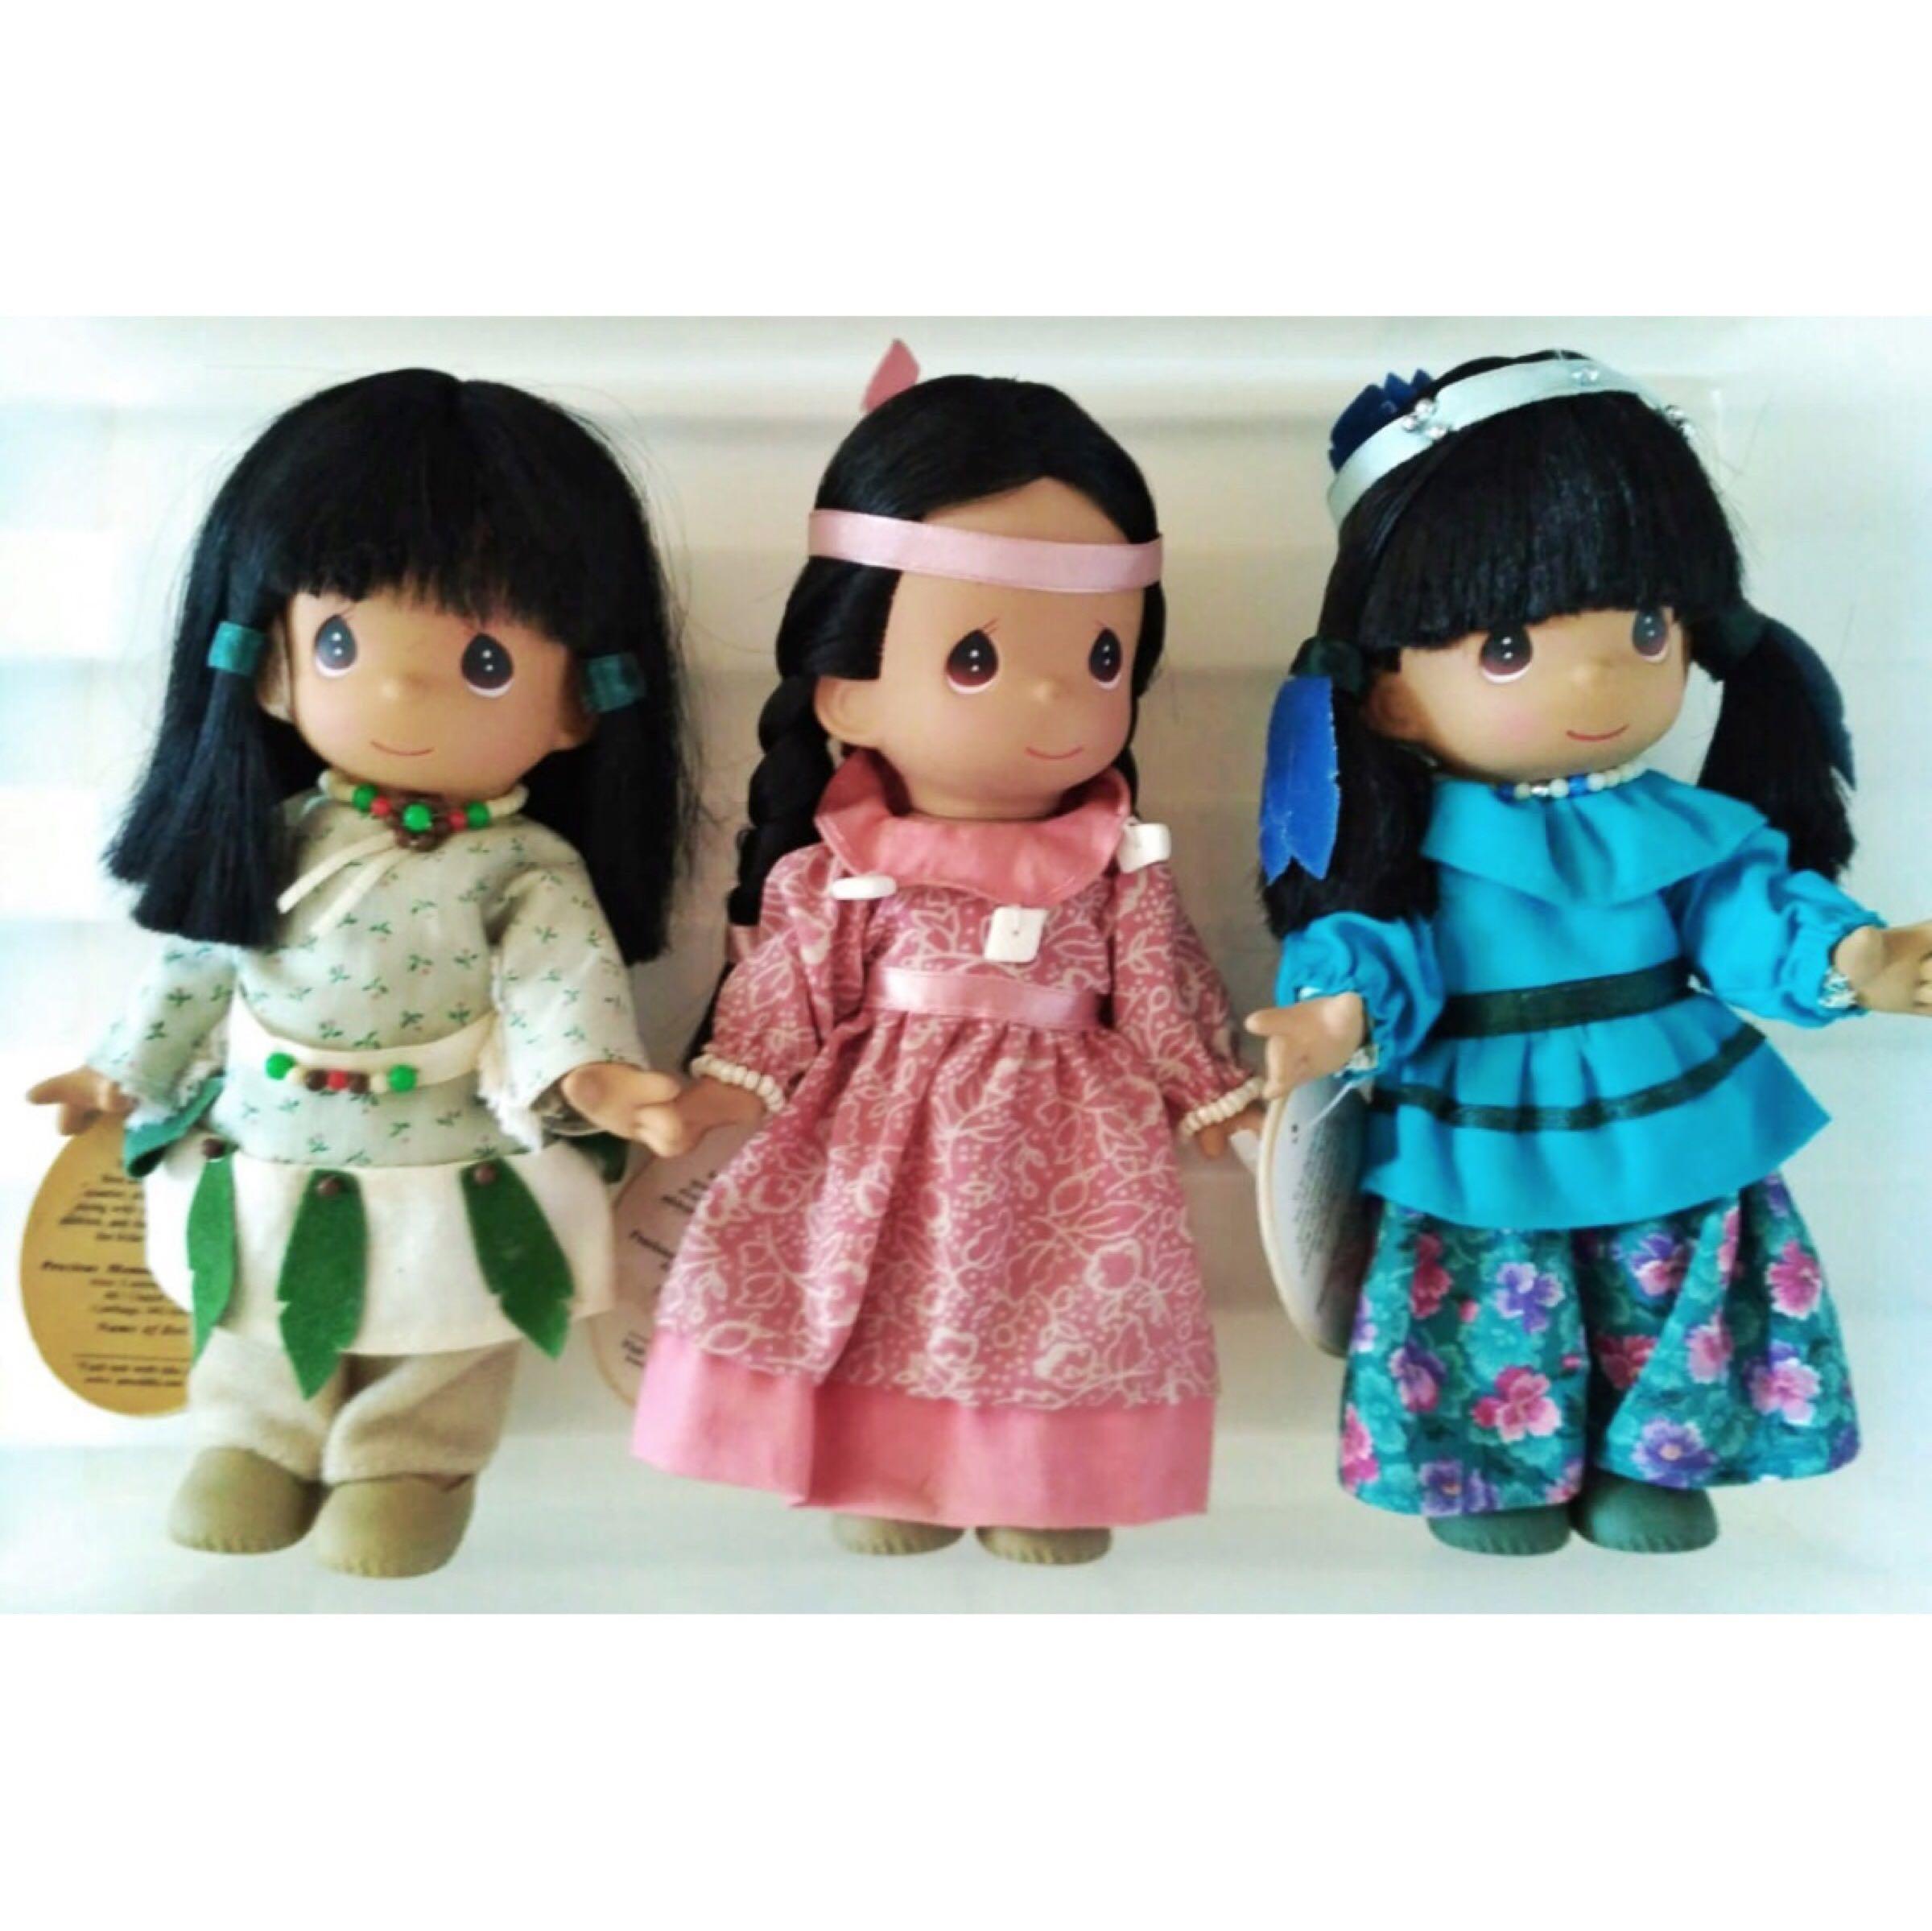 dolls and collectibles